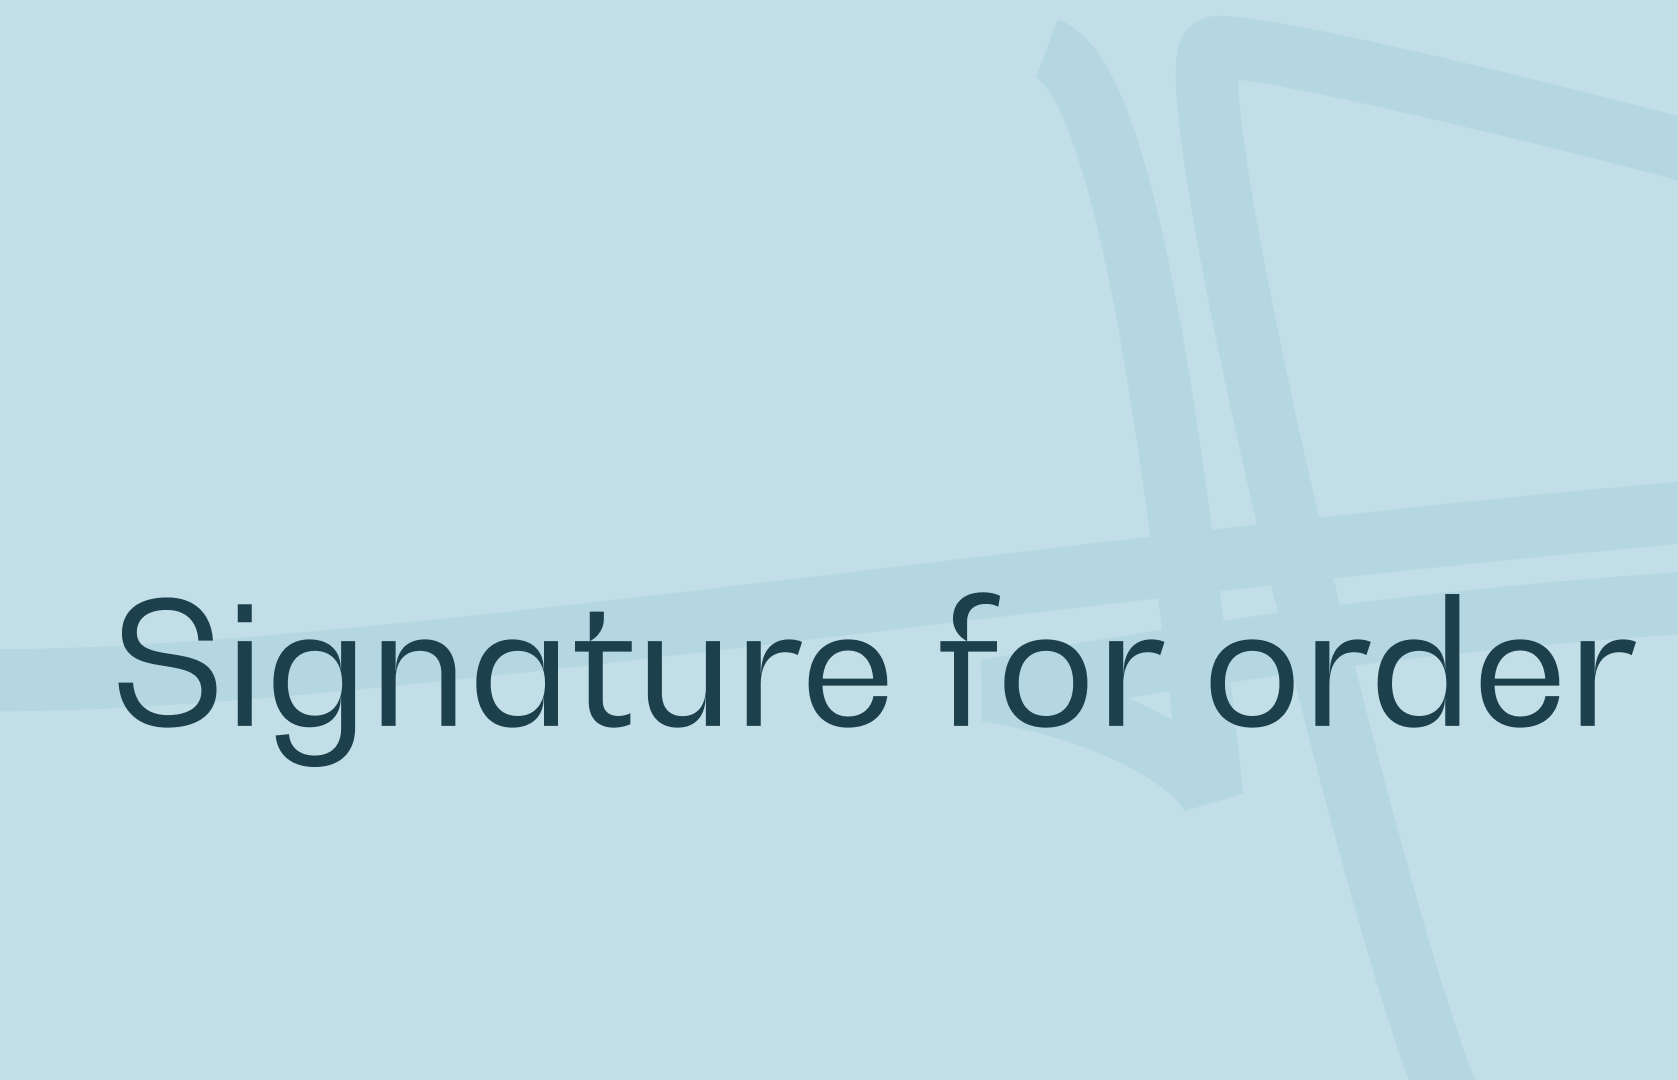 Signature for order definition and how to do it